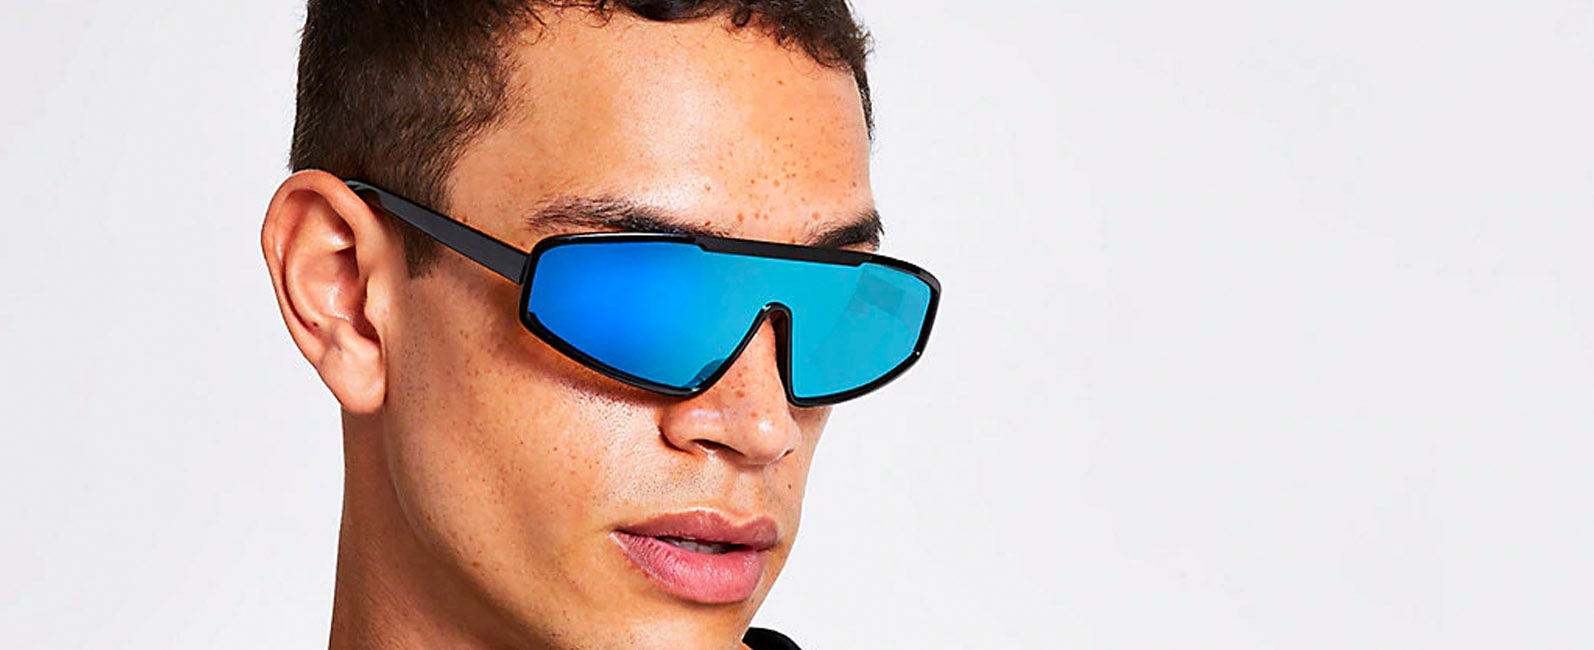 19-facts-about-visor-glasses